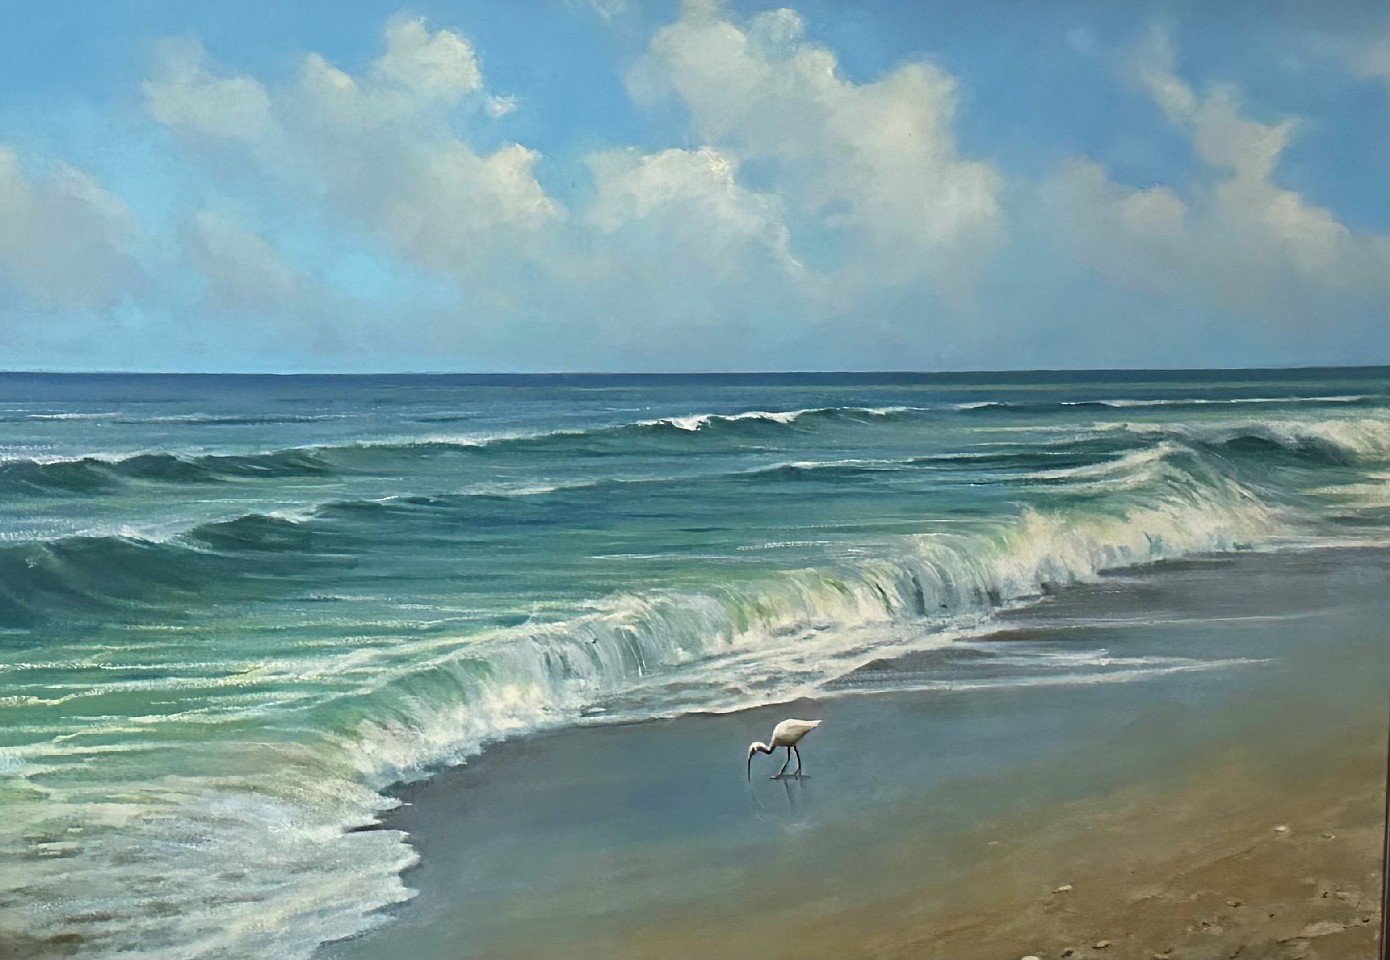 Frank Corso, Along the Surf
oil on canvas, 30 x 40 in. (76.2 x 101.6 cm)
FC240101